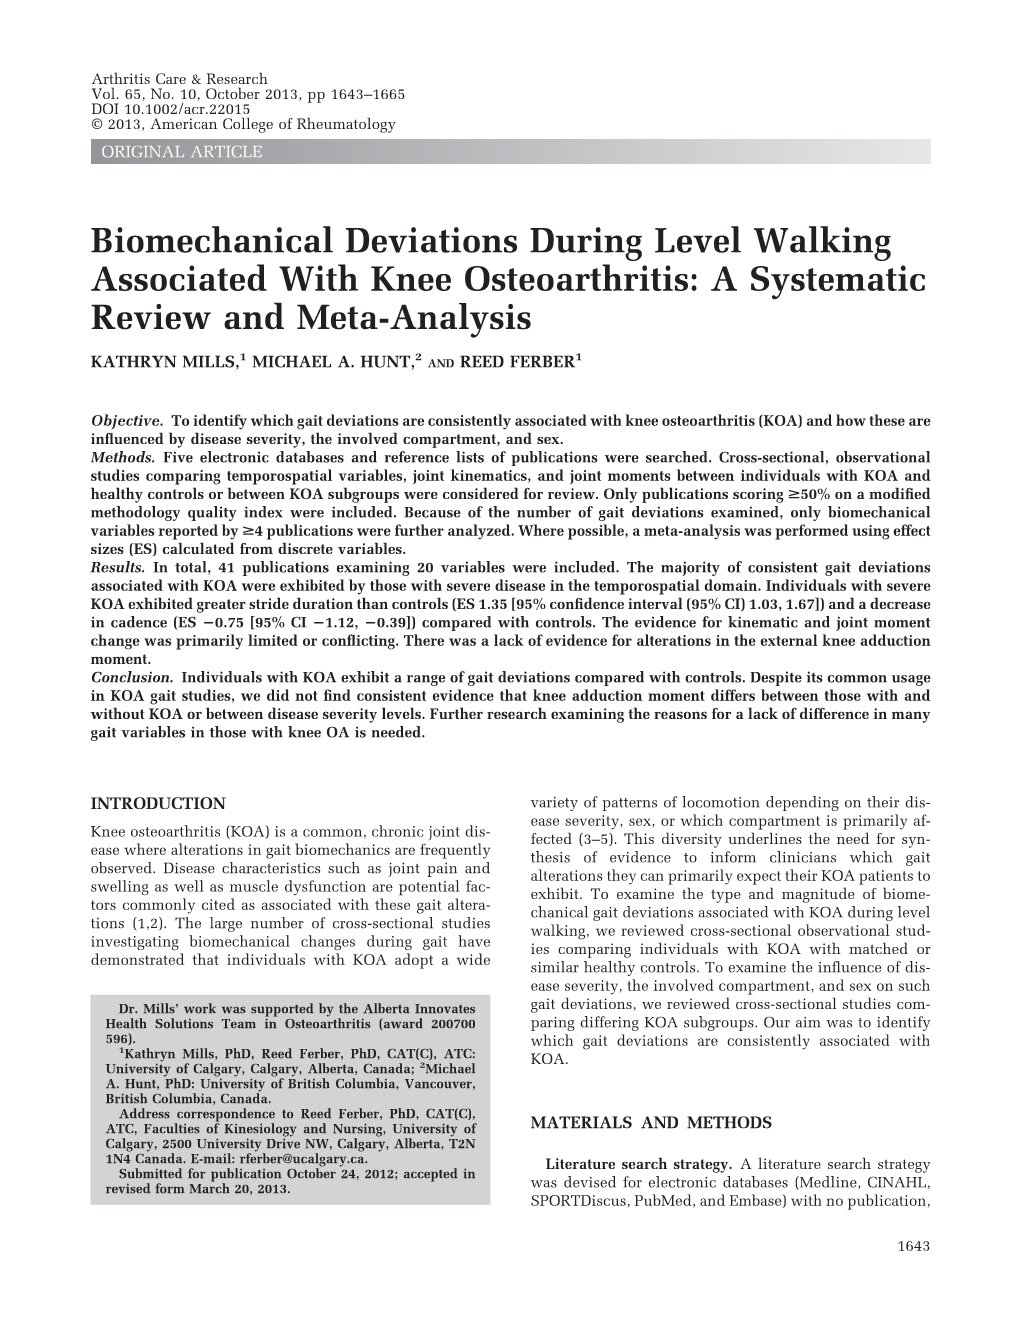 Biomechanical Deviations During Level Walking Associated with Knee Osteoarthritis: a Systematic Review and Meta-Analysis